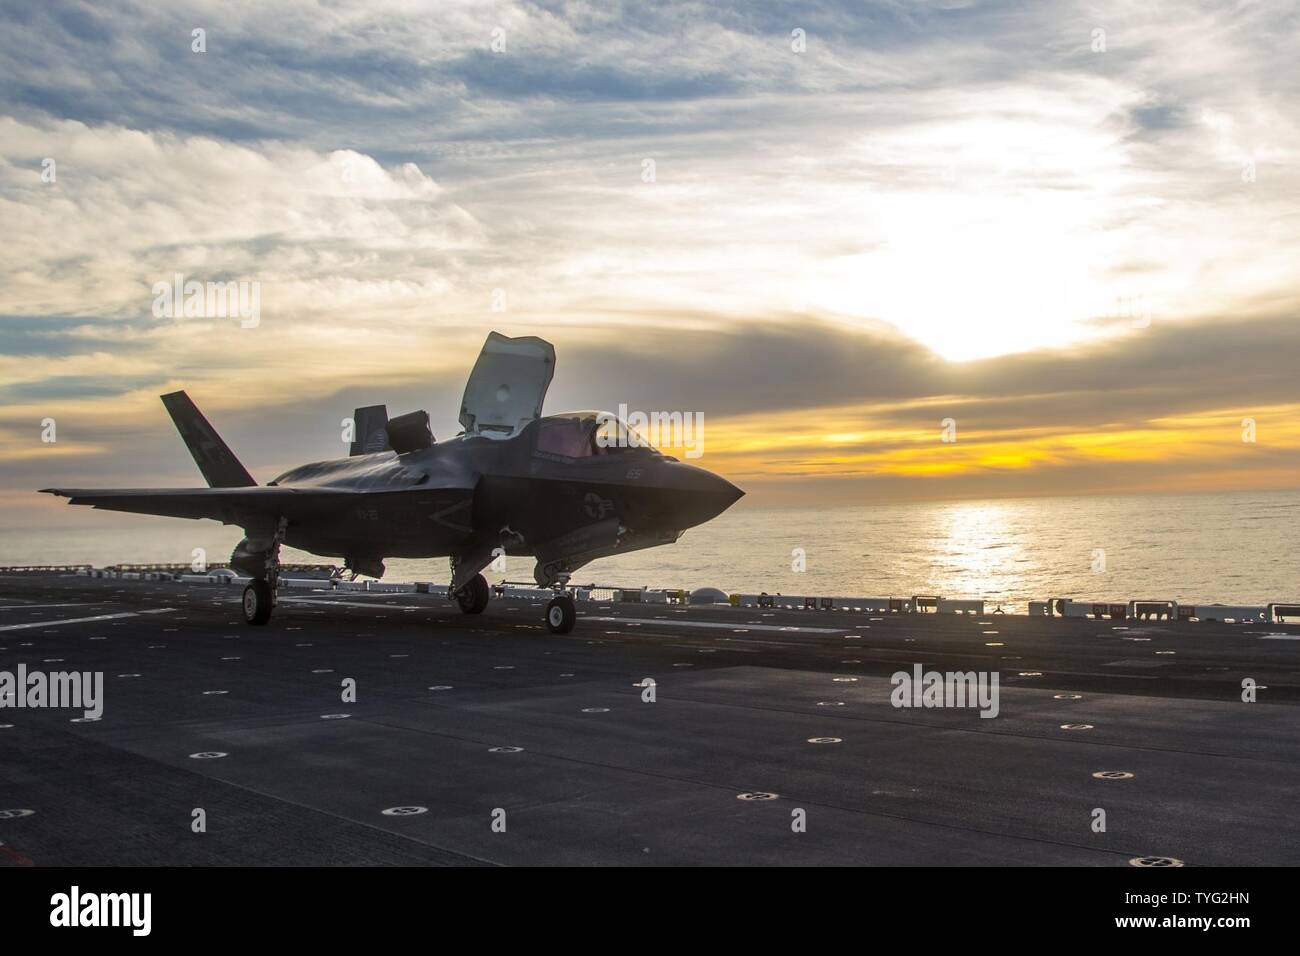 PACIFIC OCEAN (Nov. 7, 2016) — An F-35B Lightning II short takeoff/vertical landing (STOVL) aircraft launches from the amphibious assault ship USS America (LHA 6). During the third and final F-35B developmental test phase (DT-III), the aircraft is undergoing envelope expansion via a series of launches and recoveries in various operating conditions such as high sea states and high winds. Stock Photo